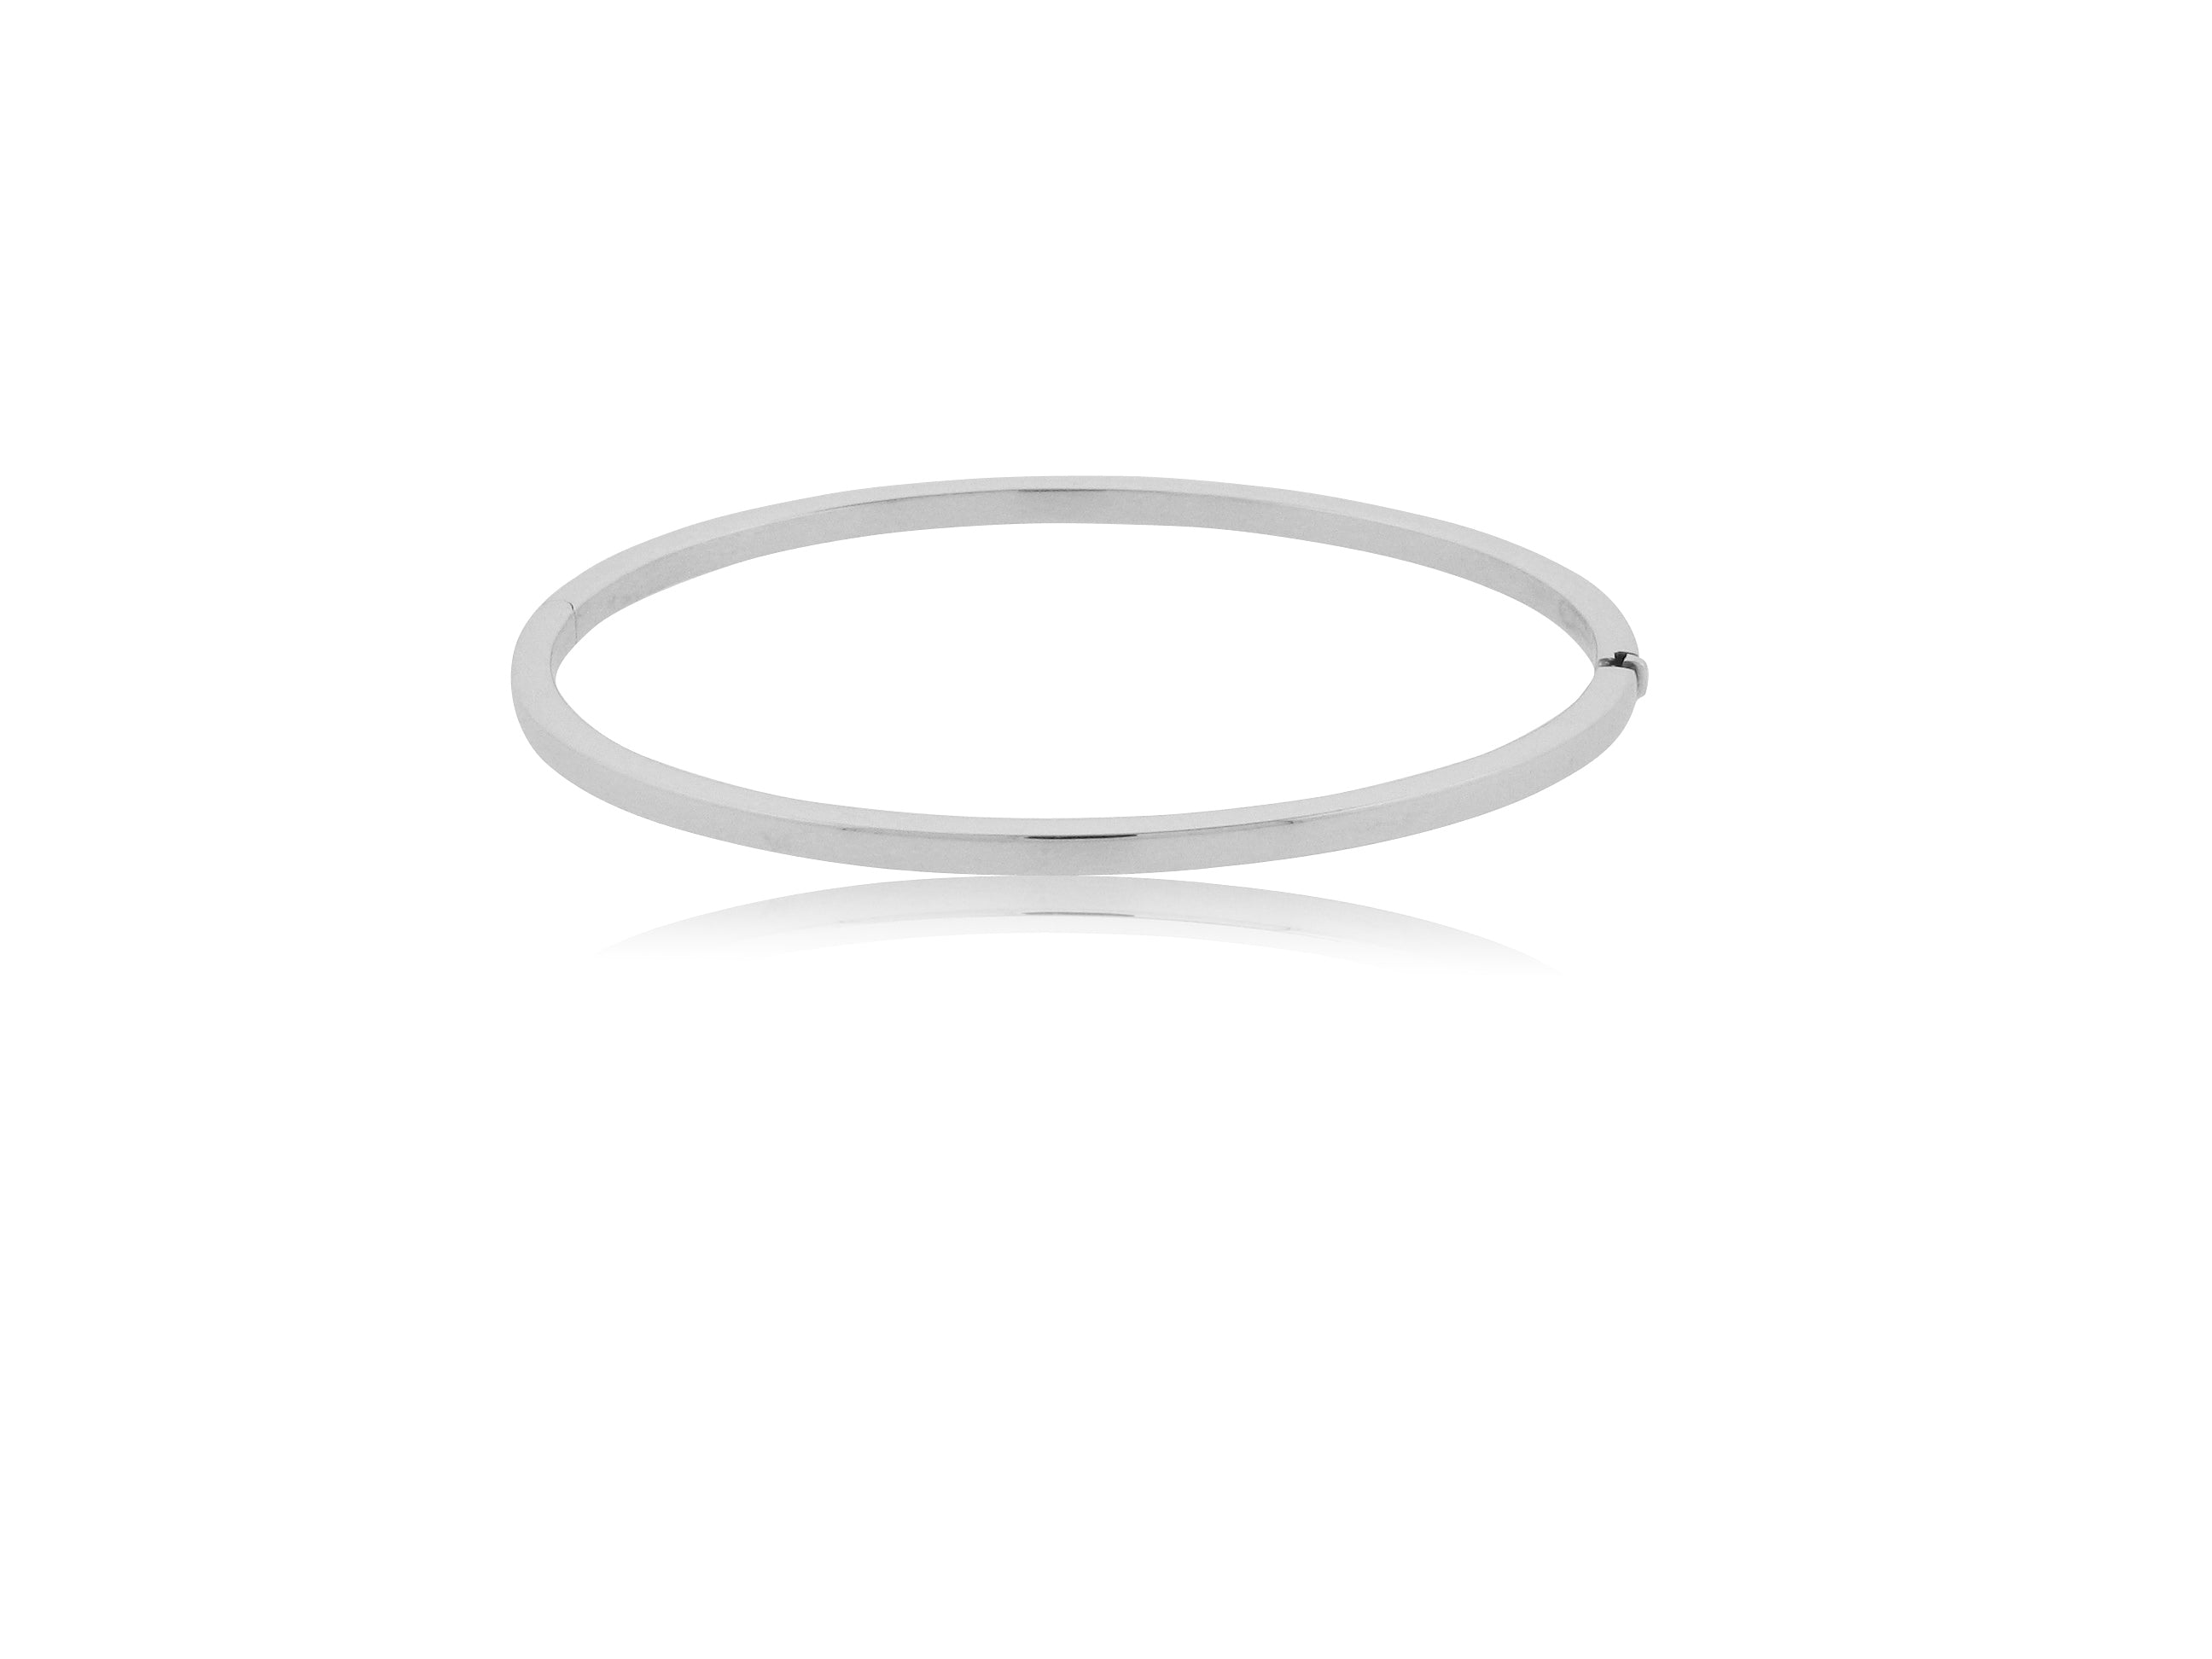 18K WHITE GOLD OVAL BANGLE BRACELET FROM THE GOLD COLLECTION